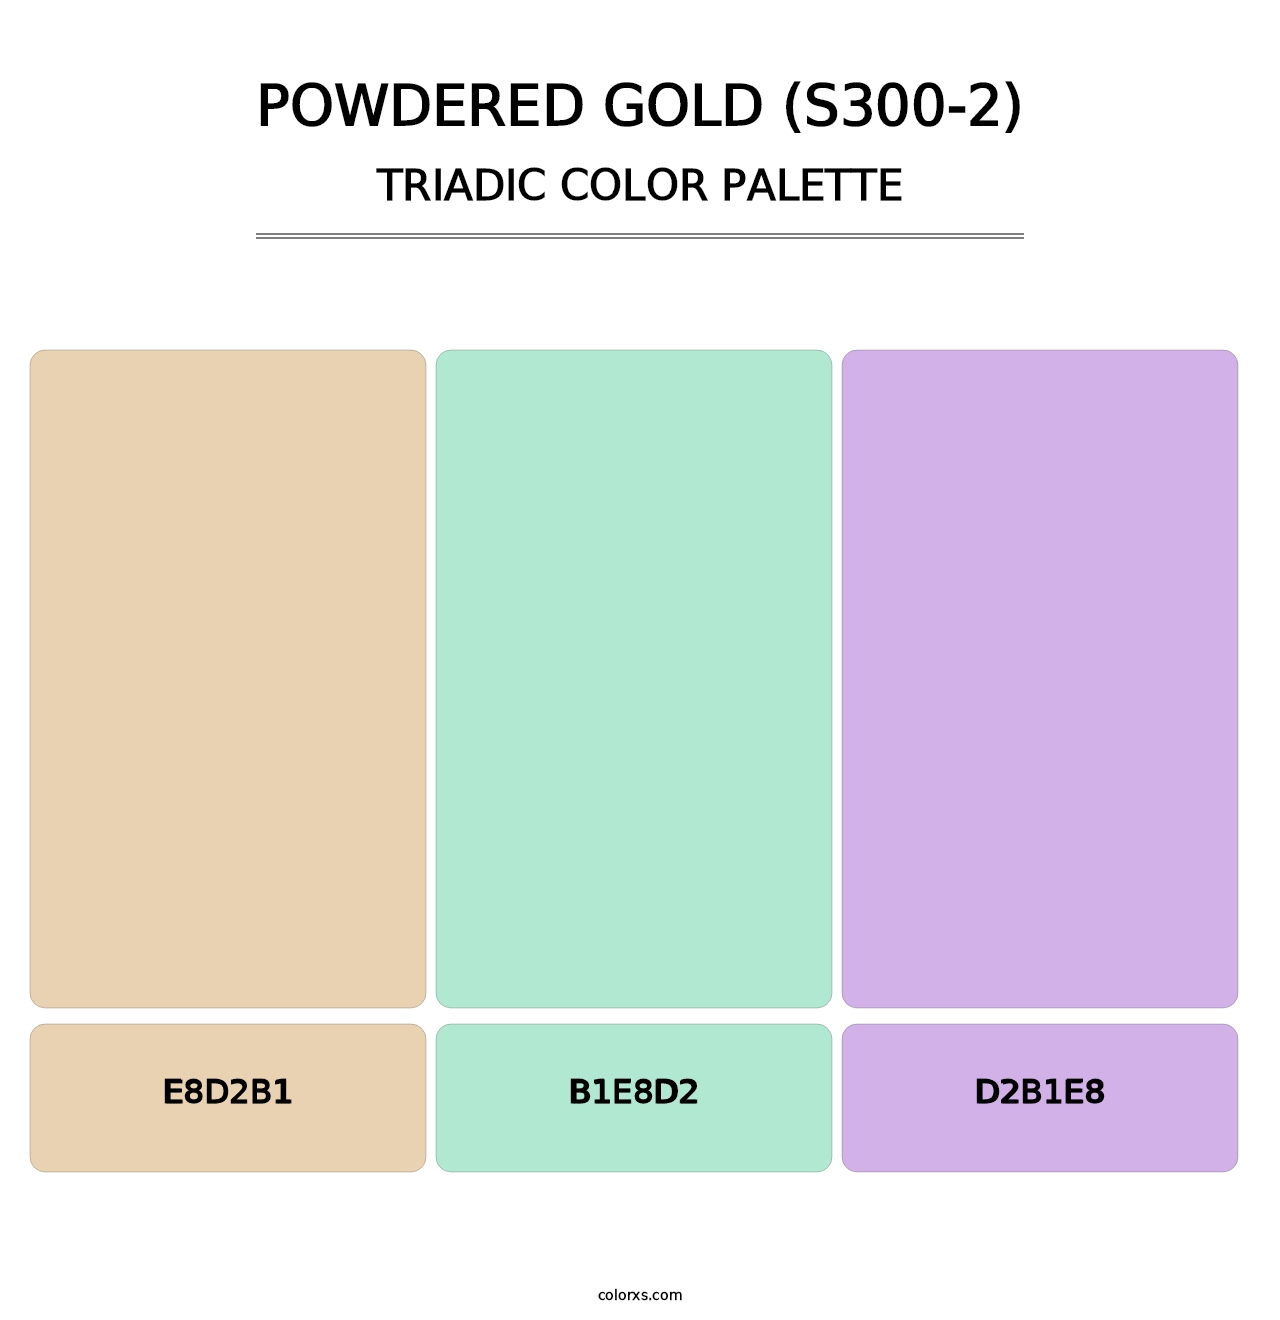 Powdered Gold (S300-2) - Triadic Color Palette